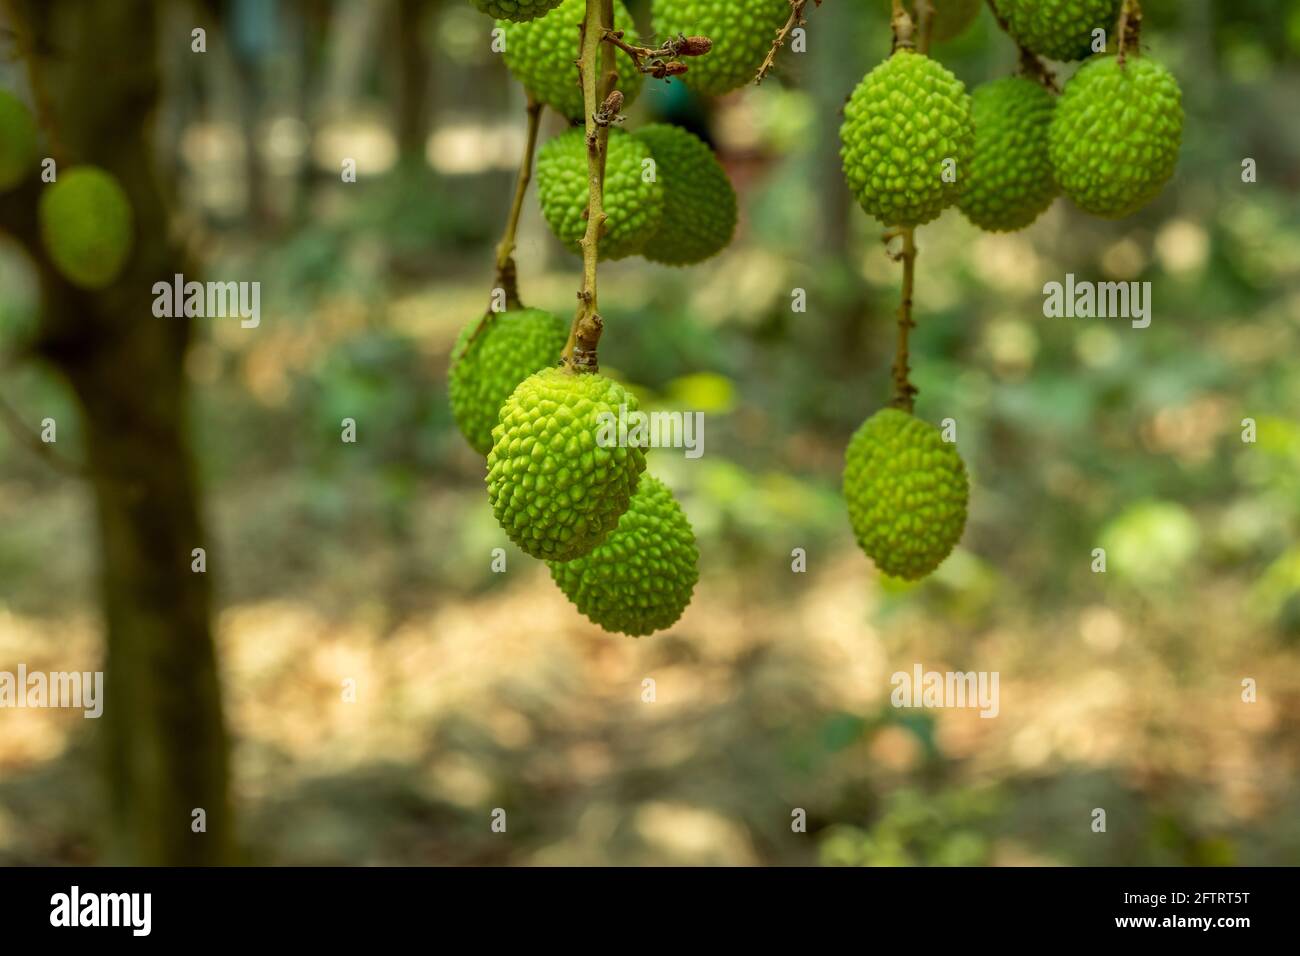 Very sour and sweet delicious green litchi or lychee which is known as a seasonal fruit in Asia Stock Photo